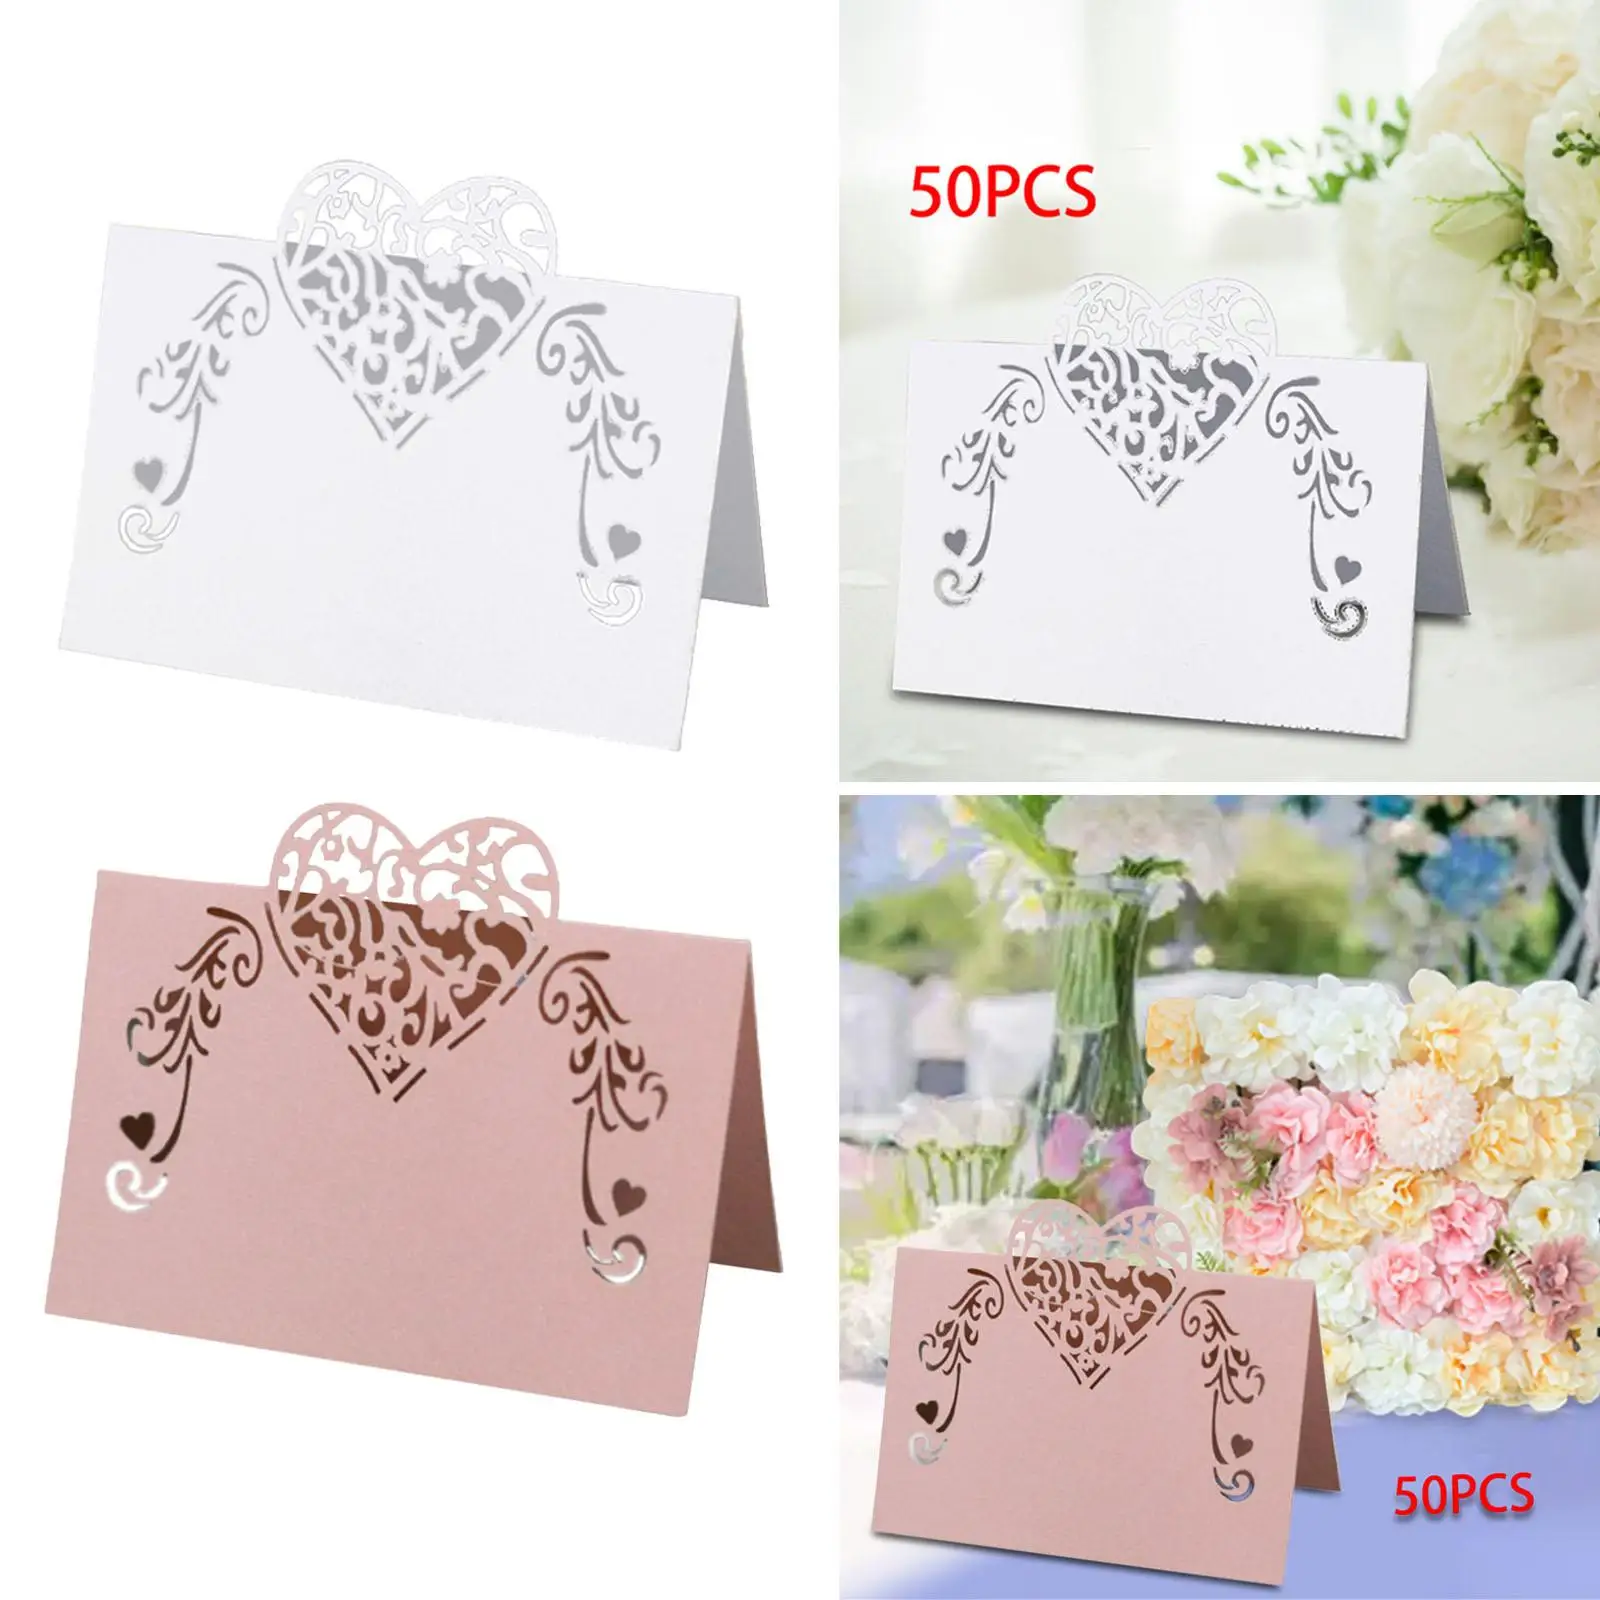 50 Pieces Paper Place Cards Table Setting Name Card Seating Place Card for Wedding Reception Engagement Anniversary party